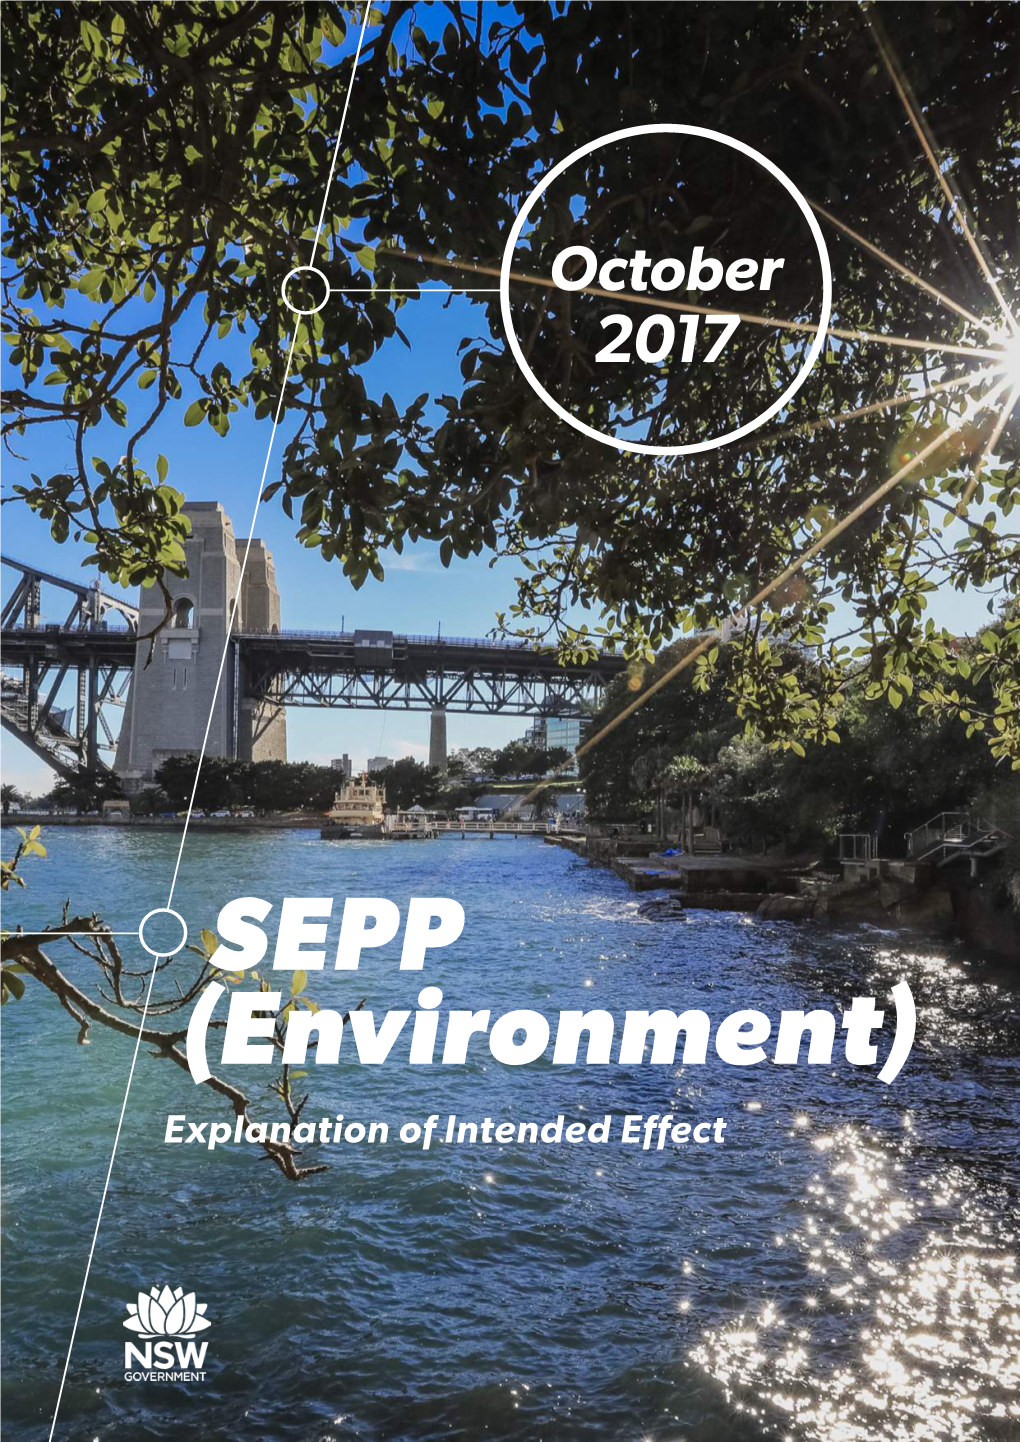 SEPP Environment Explanation of Intended Effect